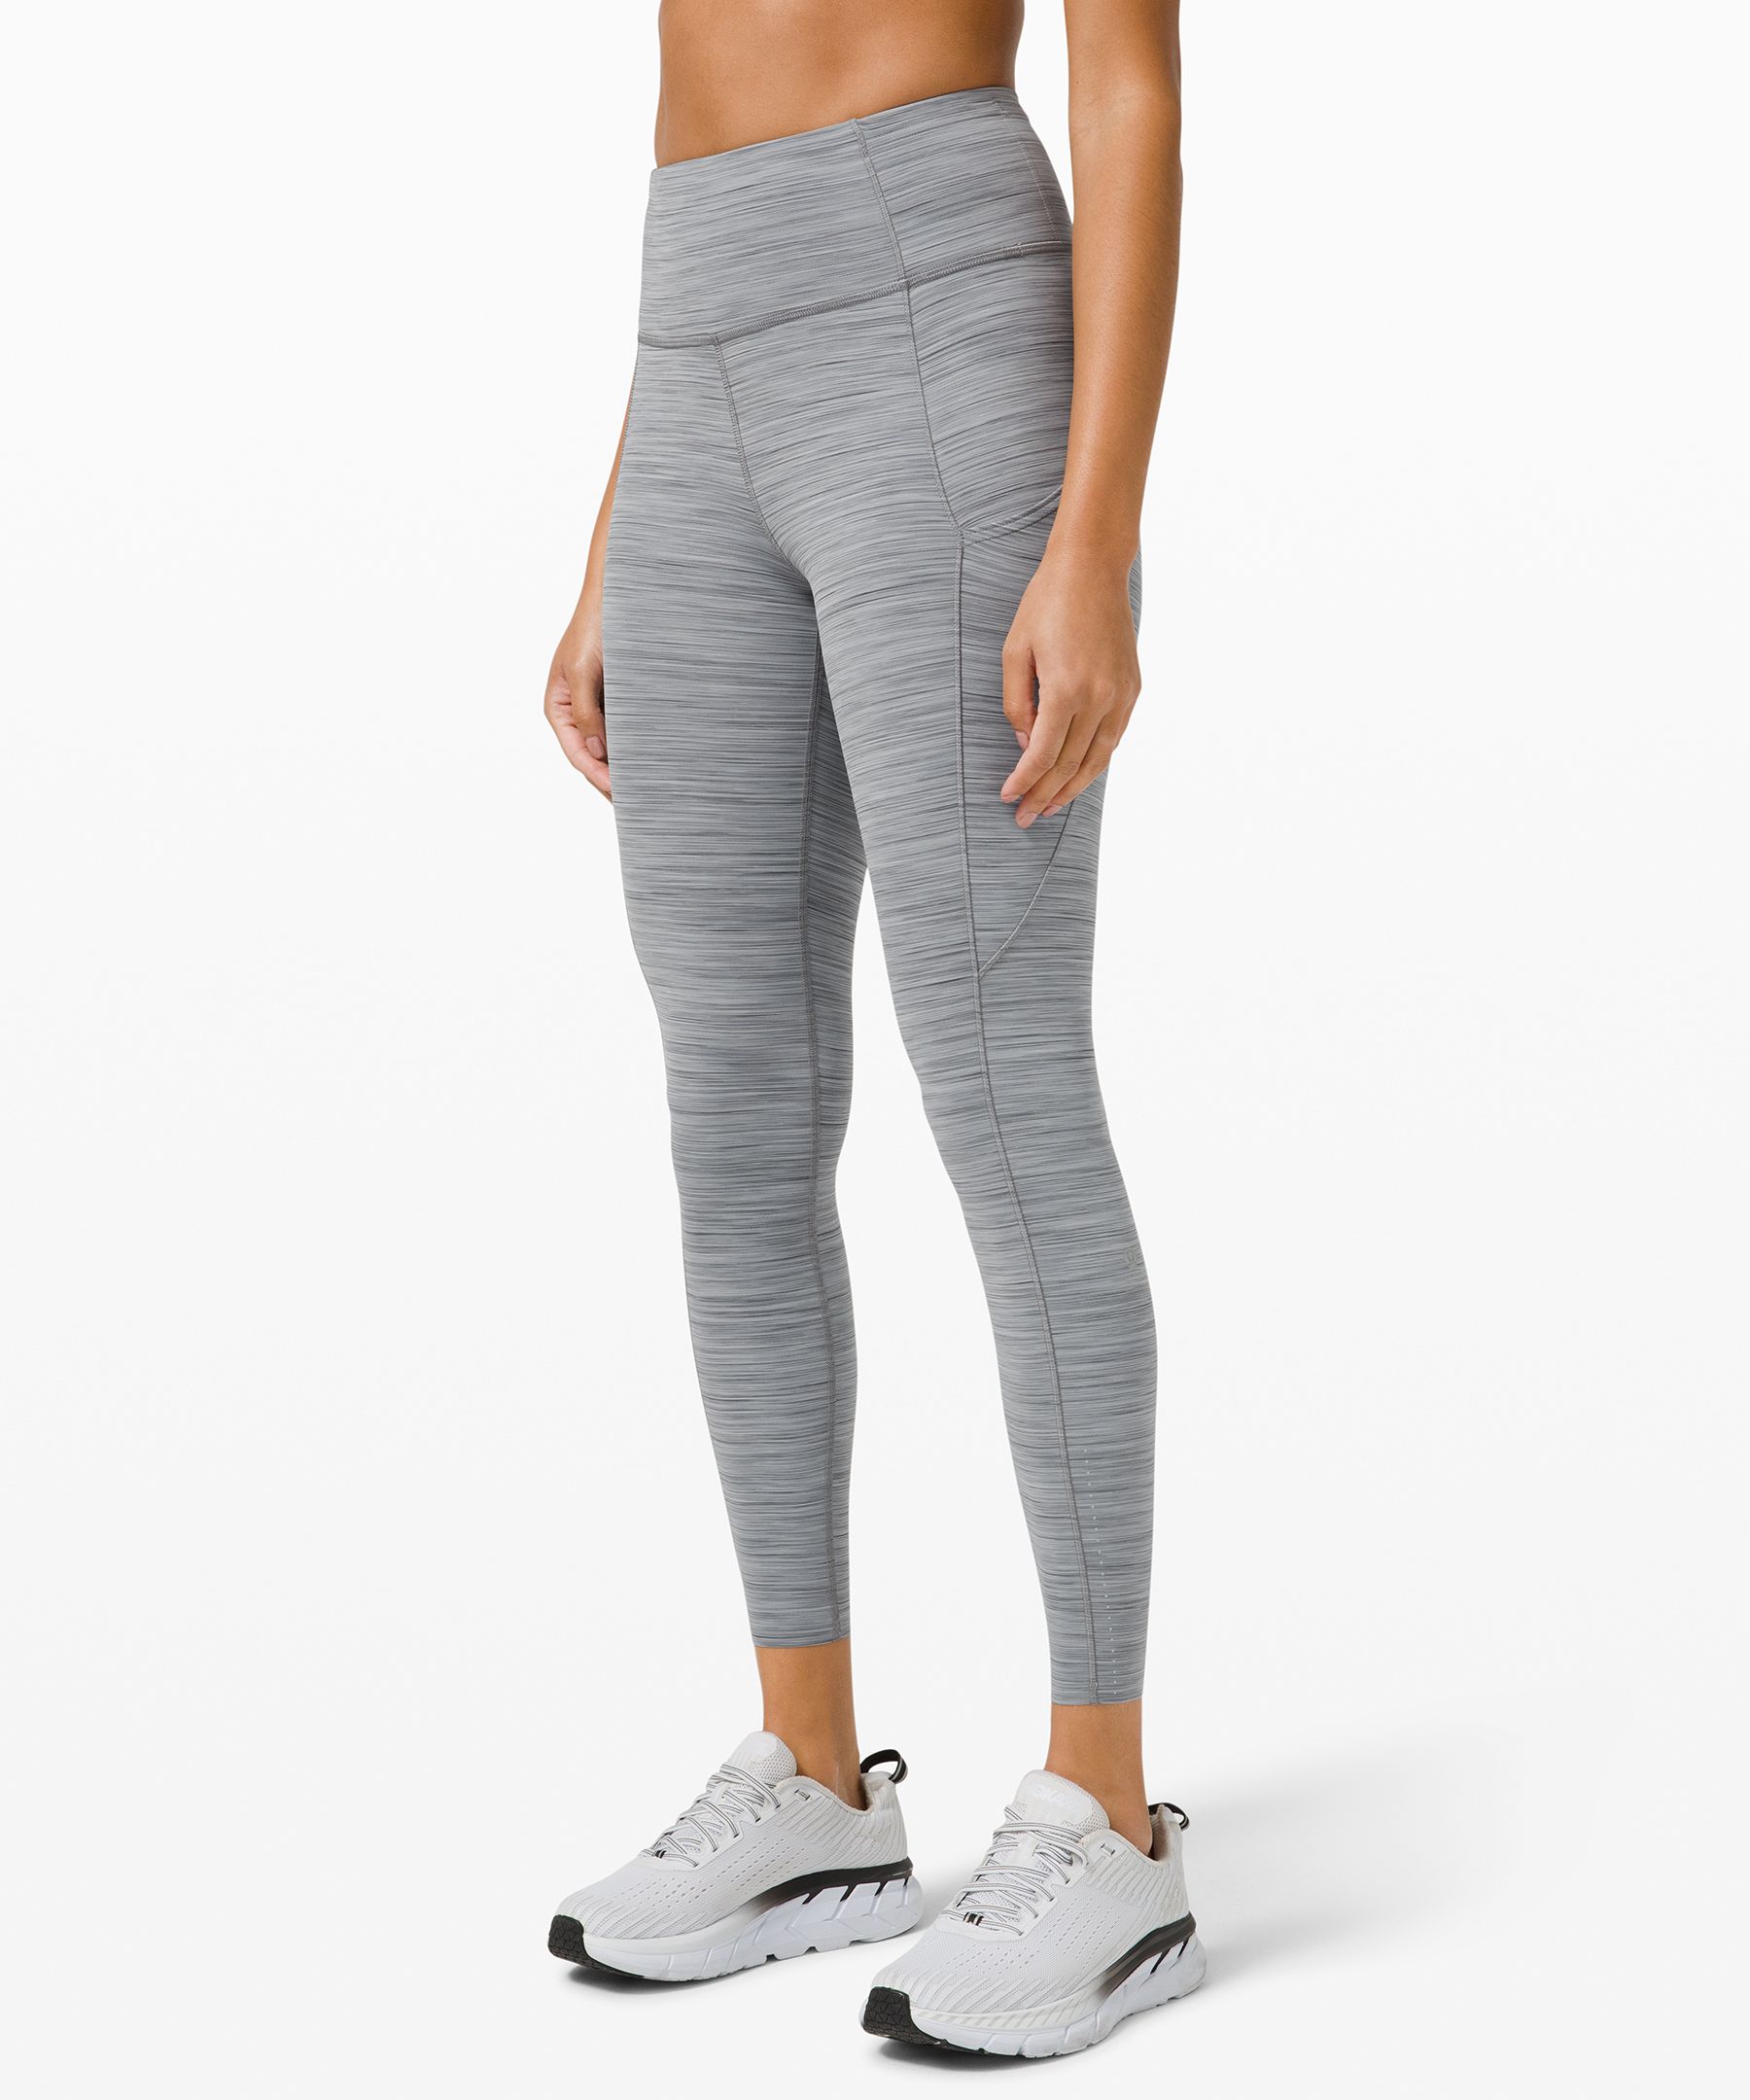 Lululemon camo fast and free tights review-3 - Agent Athletica